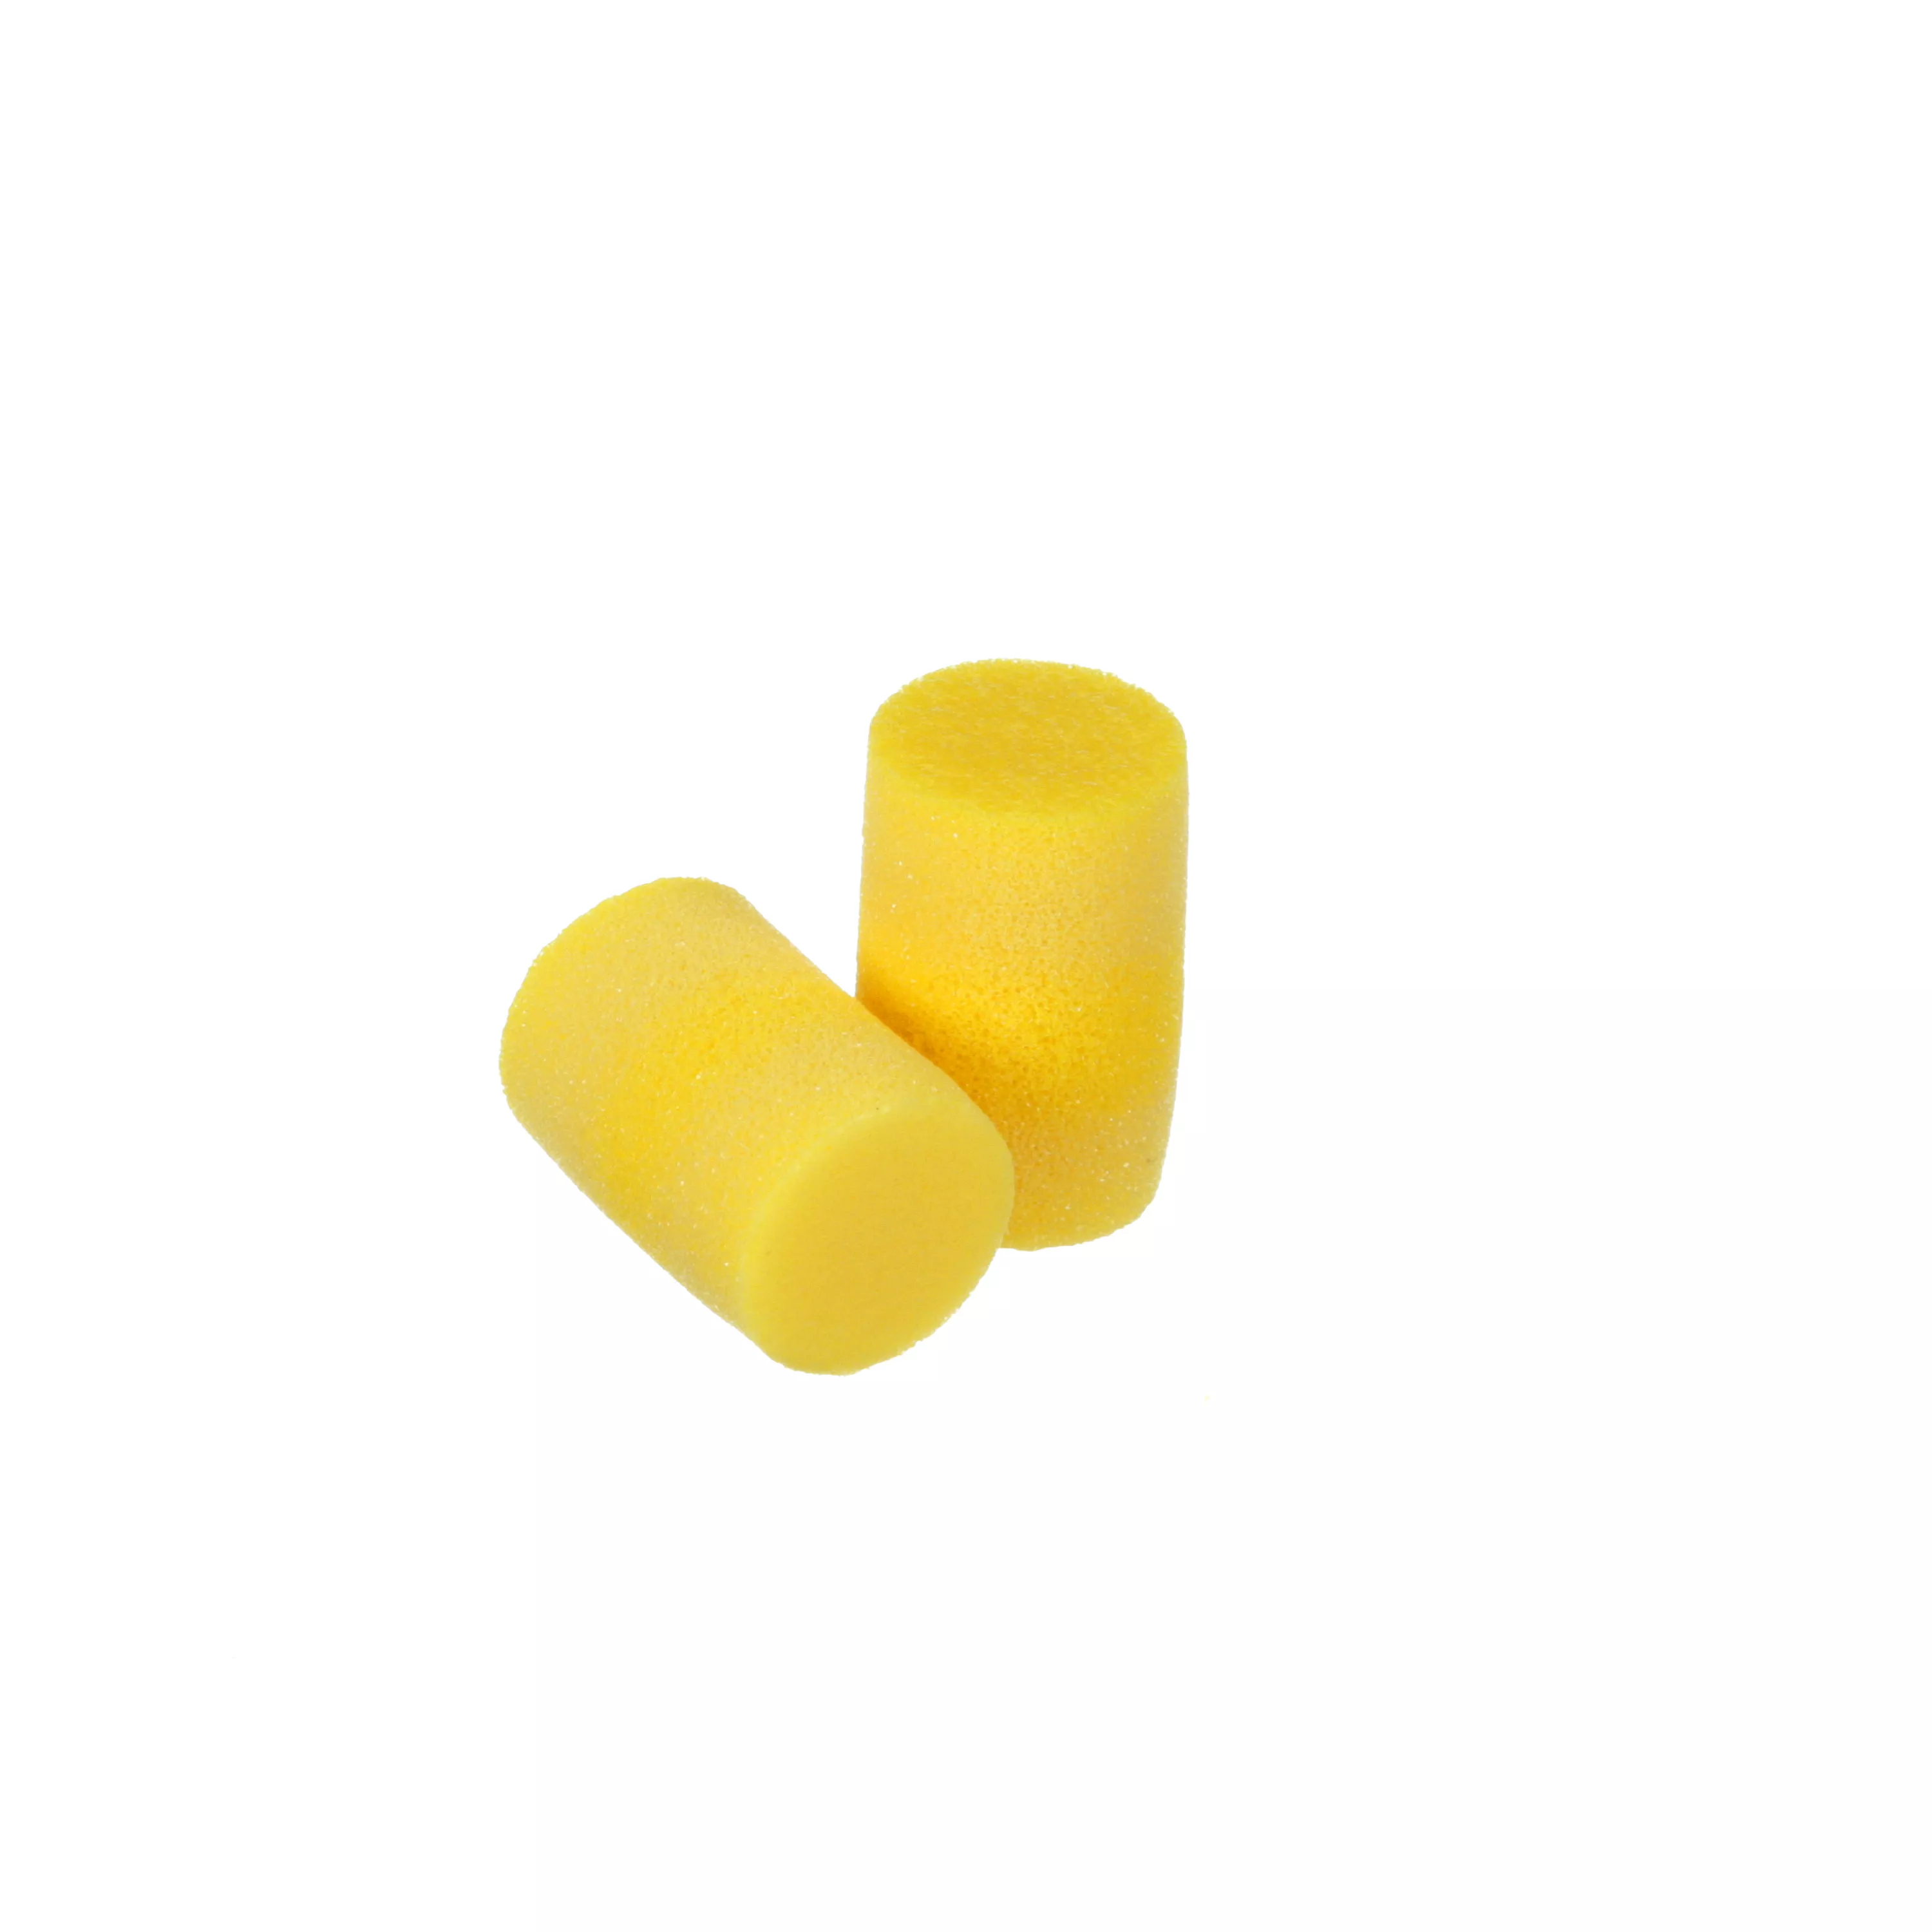 3M™ E-A-R™ Classic™ Earplugs 310-1001, Uncorded, Pillow Pack, 2000
Pair/Case